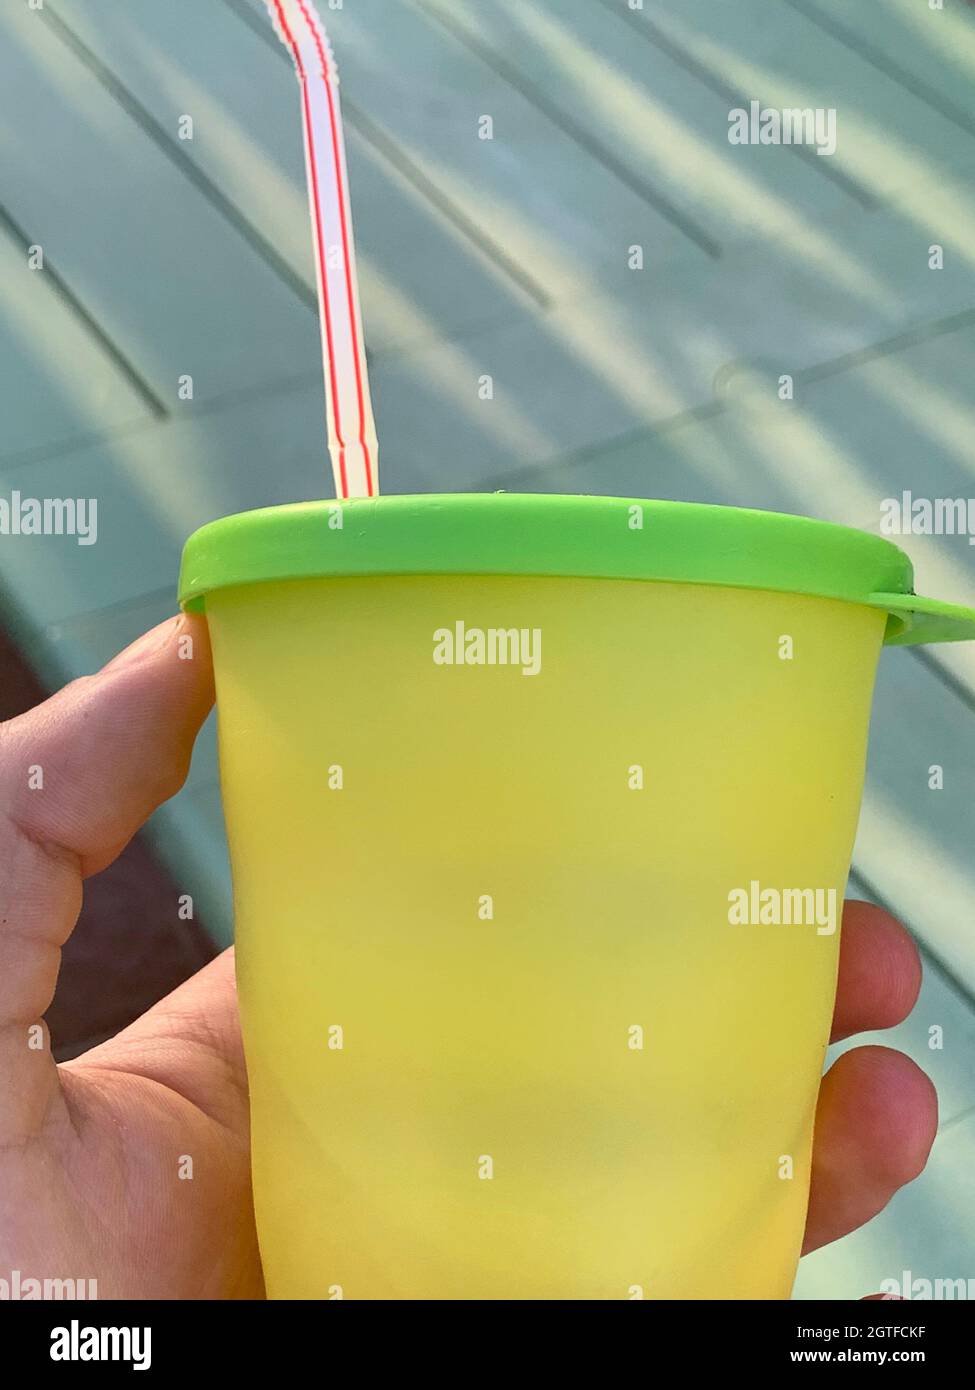 Close-up Of Hand Holding Plastic Cup With Drinking Straw Stock Photo